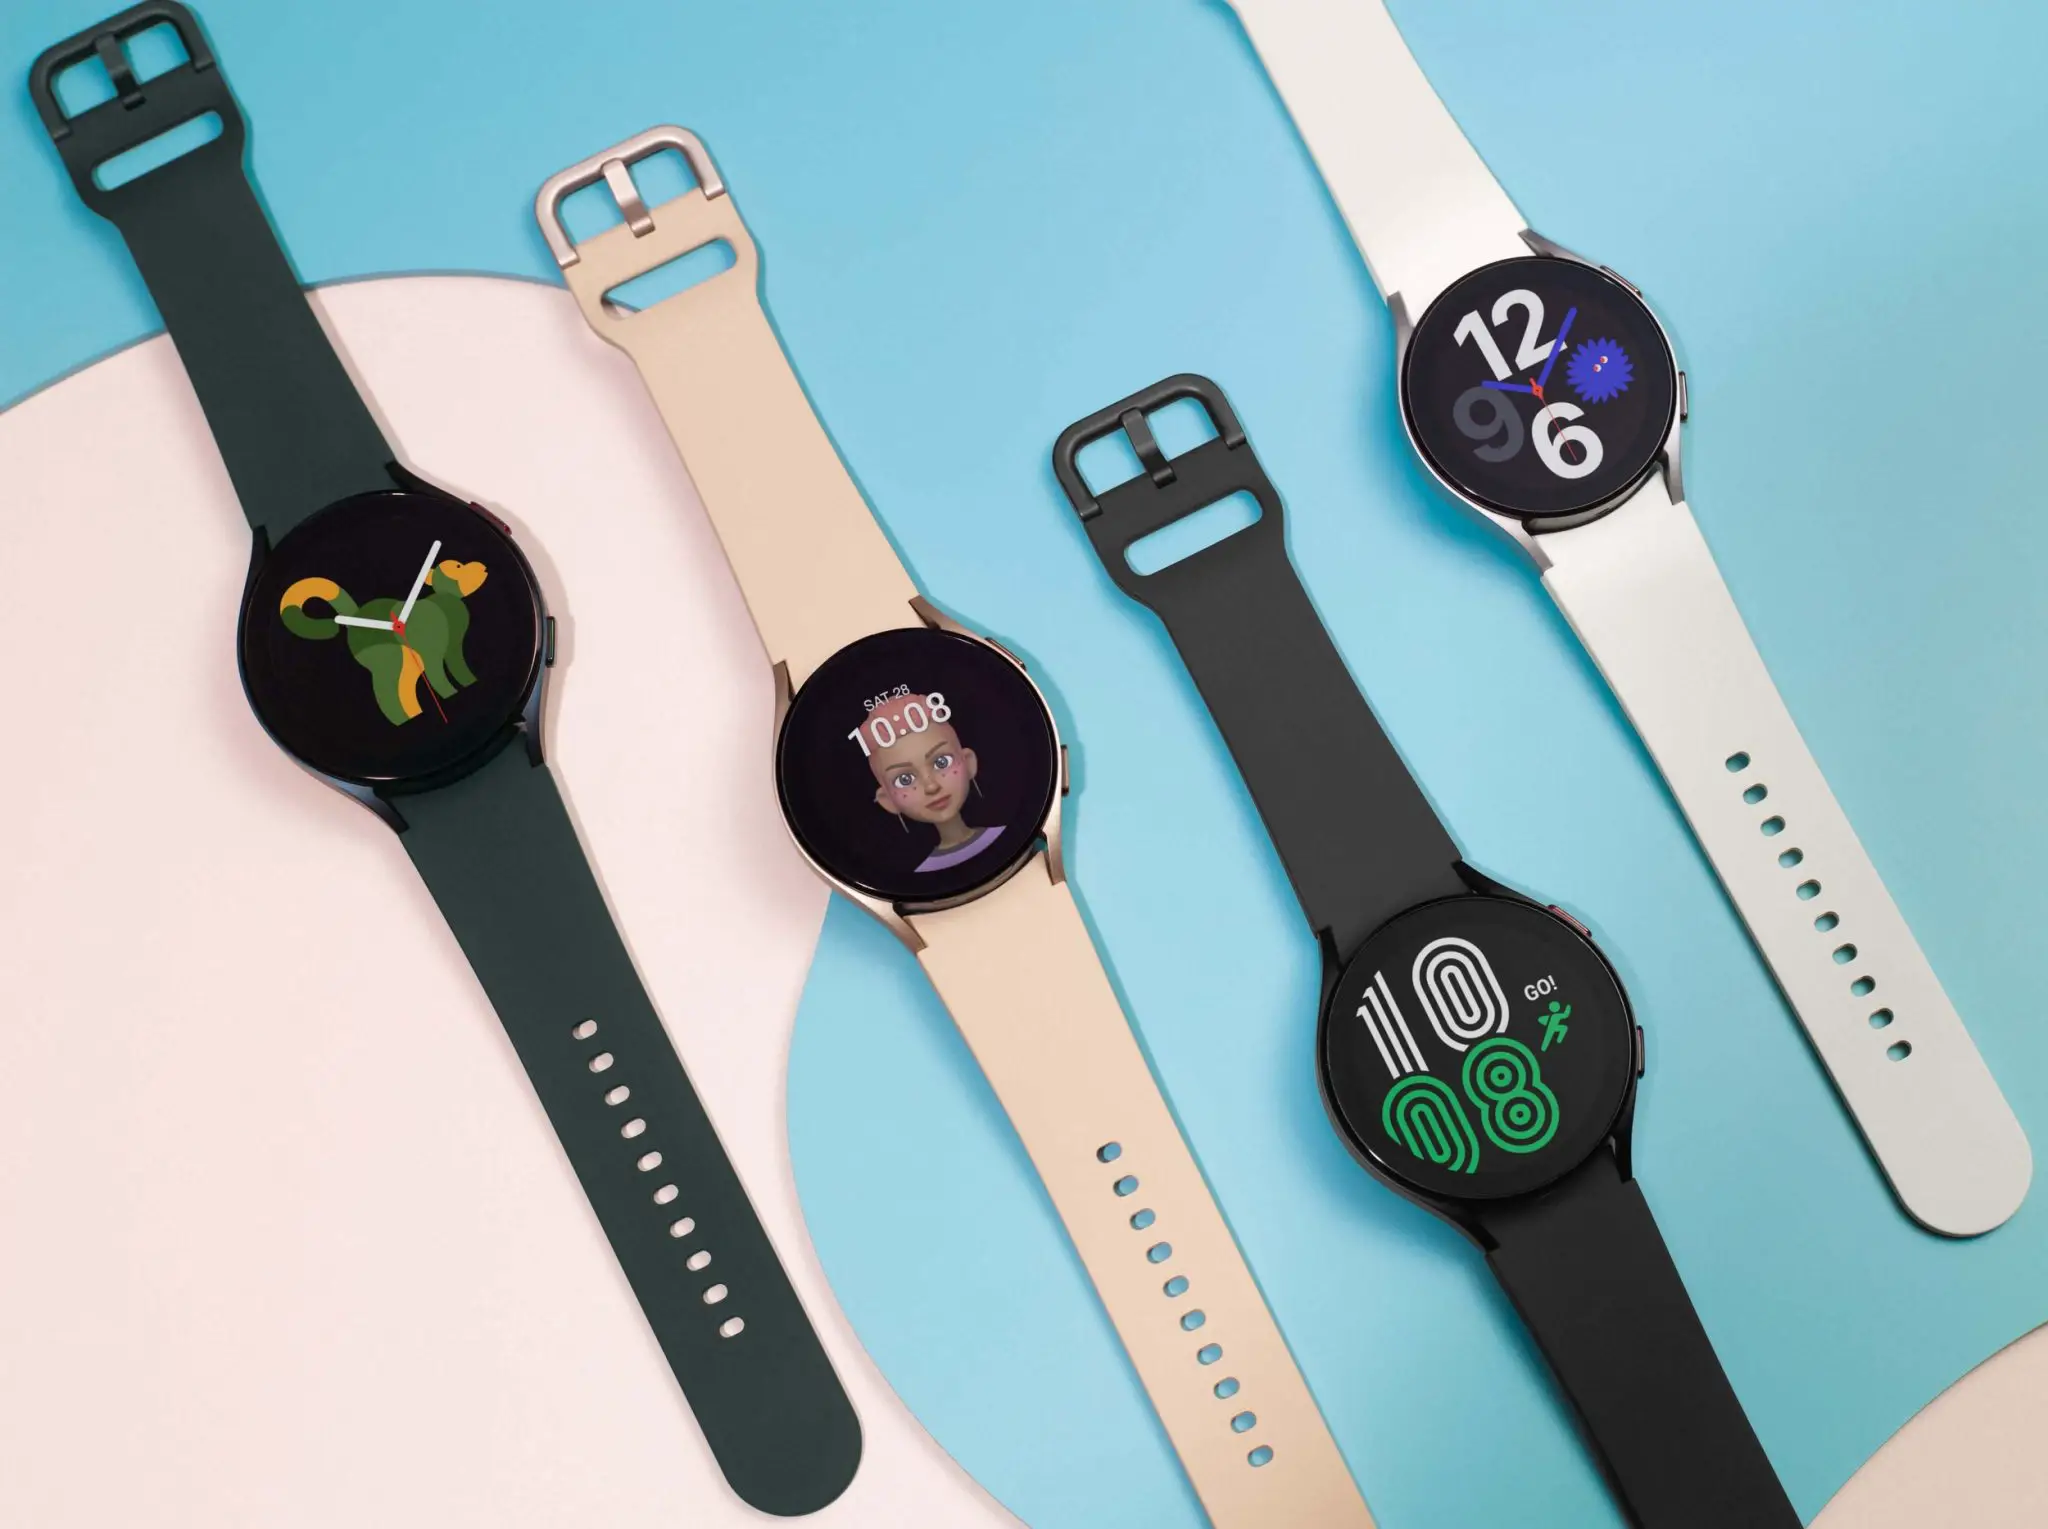 Samsung Galaxy Watch 4 and Watch 4 Classic are here to take over the